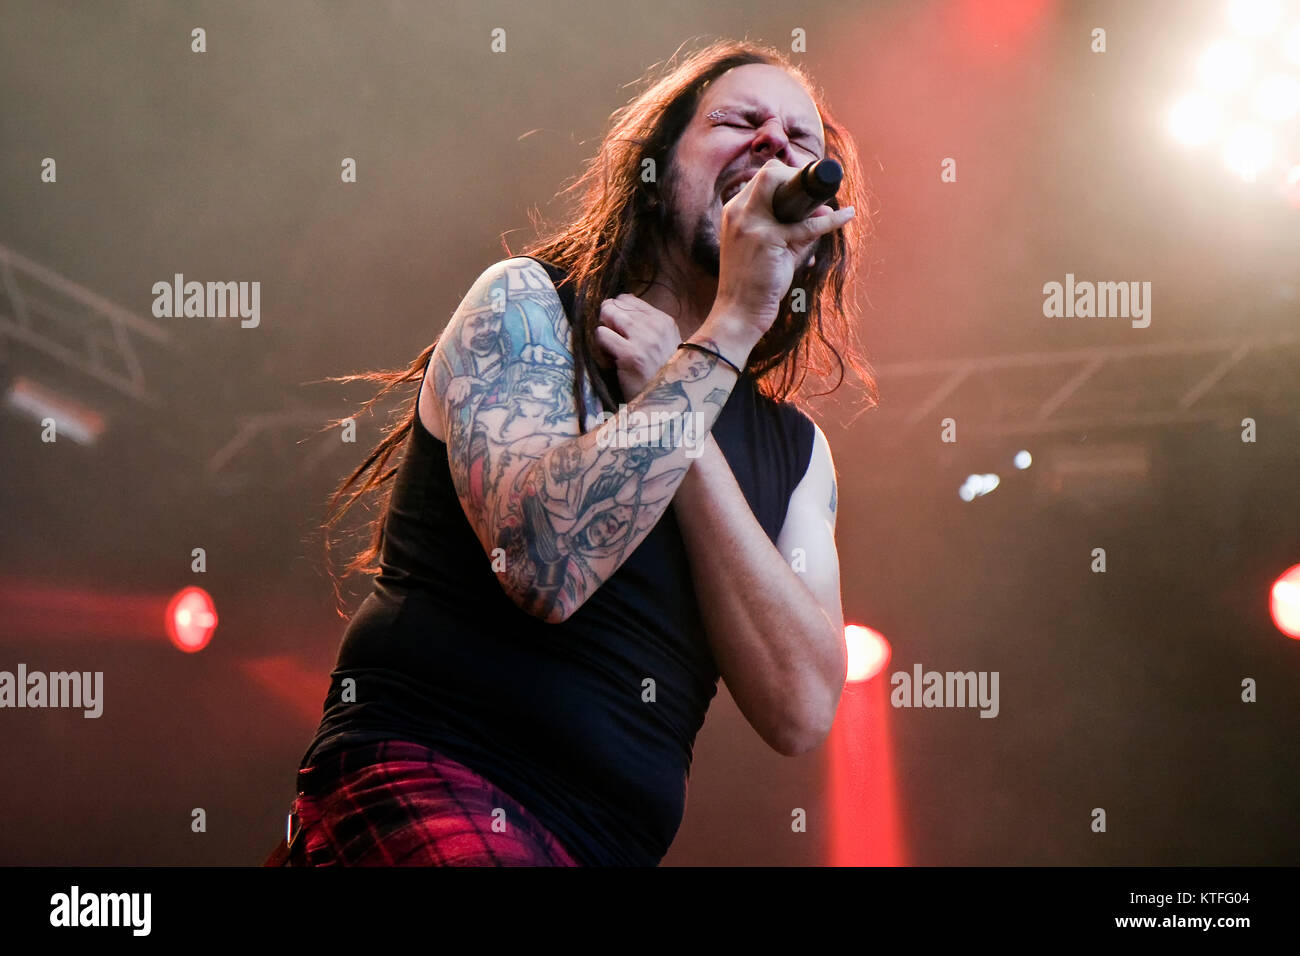 The American heavy metal band Korn (stylized KoЯn) performs a live concert at Youngstorget in Oslo. Here lead singer Jonathan Davis is seen live on stage. Norway, 16/06 2011. Stock Photo